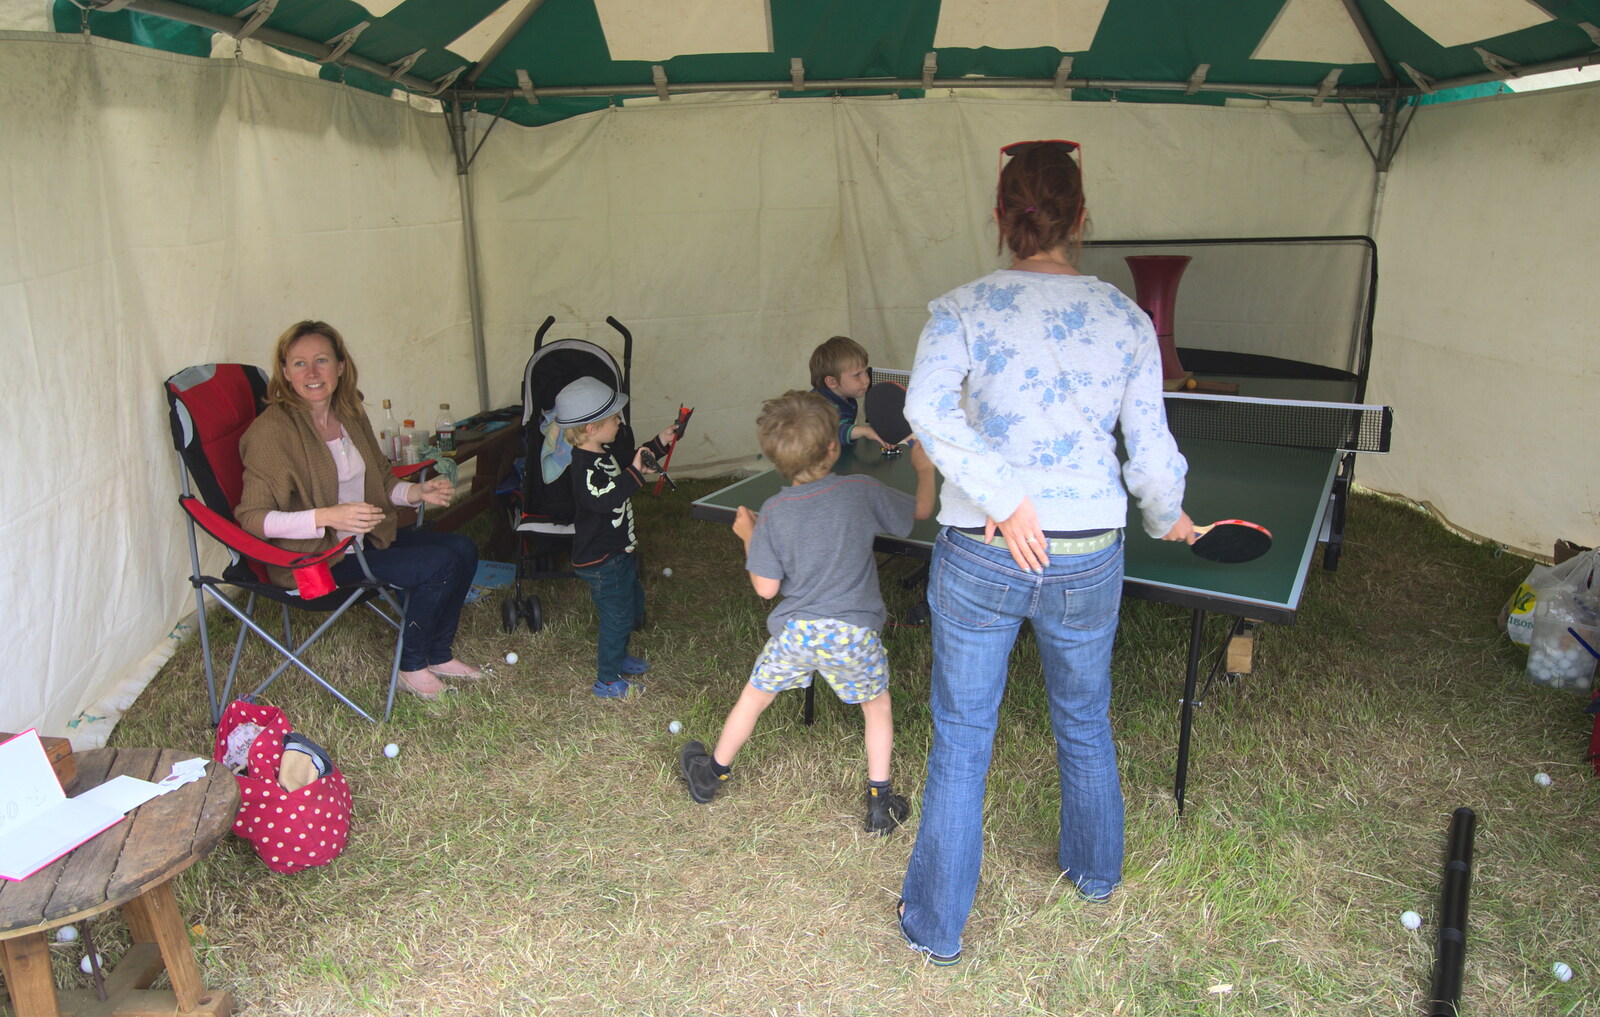 We visit Wavy's Ping Pong tent from A Vintage Tractorey Sort of Day, Palgrave, Suffolk - 21st June 2015